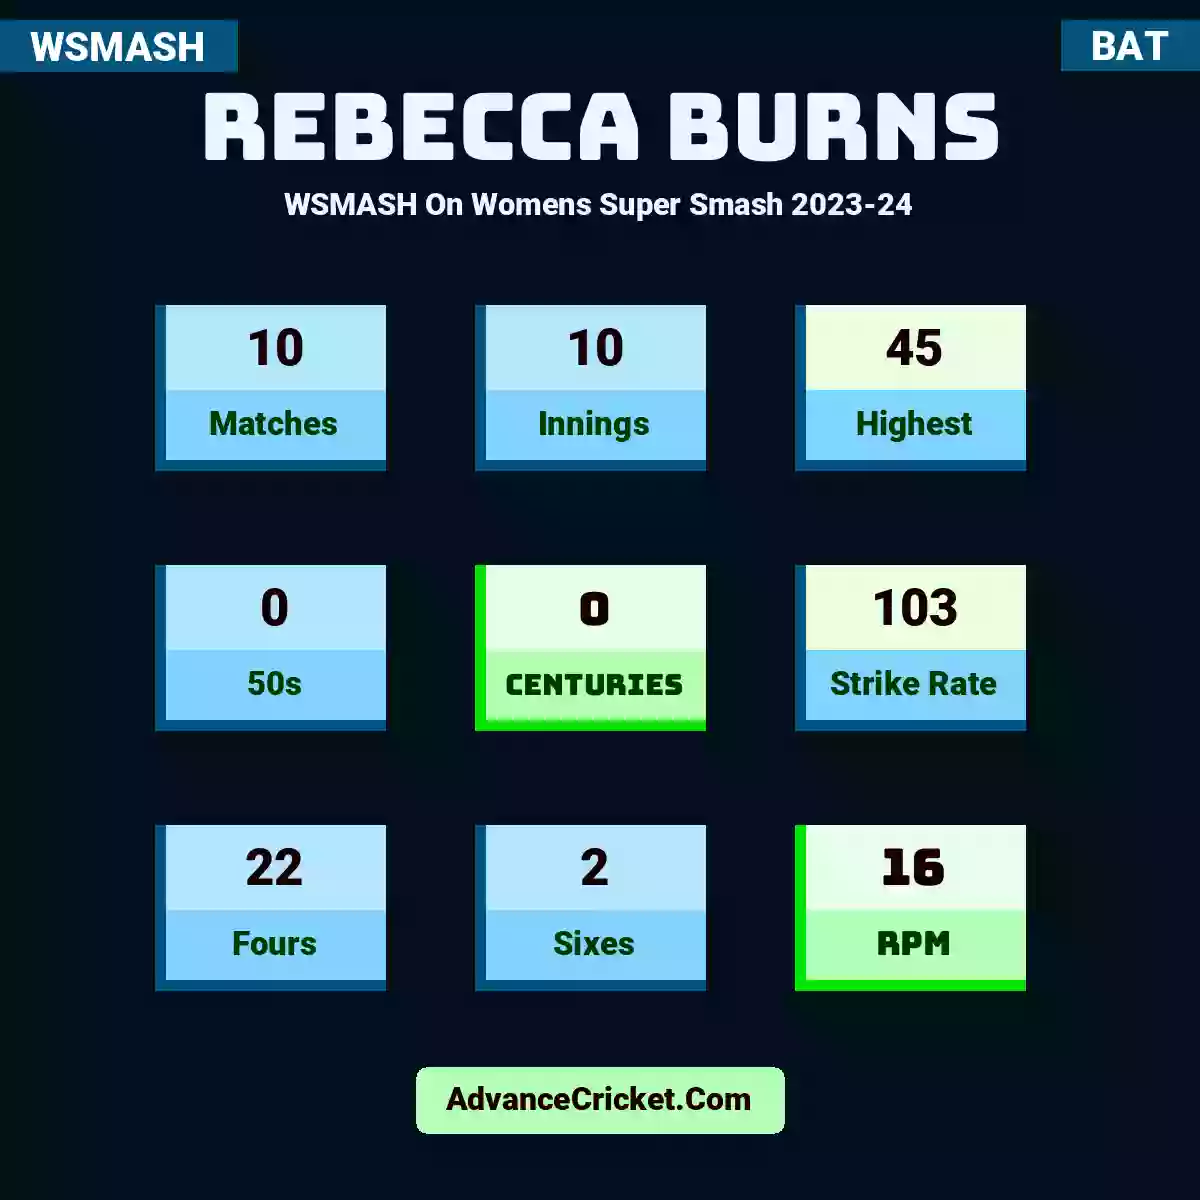 Rebecca Burns WSMASH  On Womens Super Smash 2023-24, Rebecca Burns played 10 matches, scored 45 runs as highest, 0 half-centuries, and 0 centuries, with a strike rate of 103. R.Burns hit 22 fours and 2 sixes, with an RPM of 16.